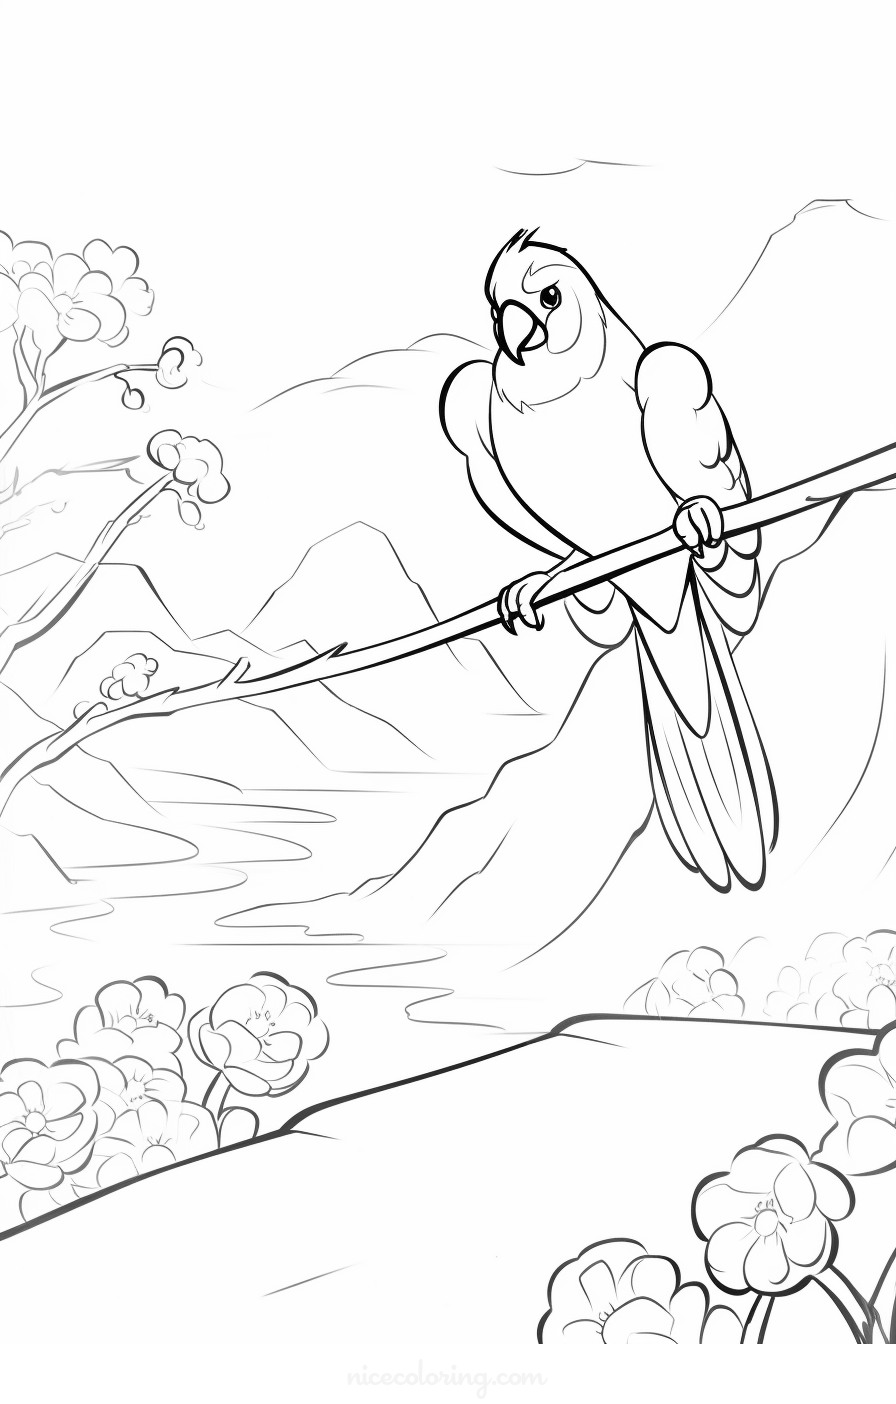 Birds resting on tree branches coloring page